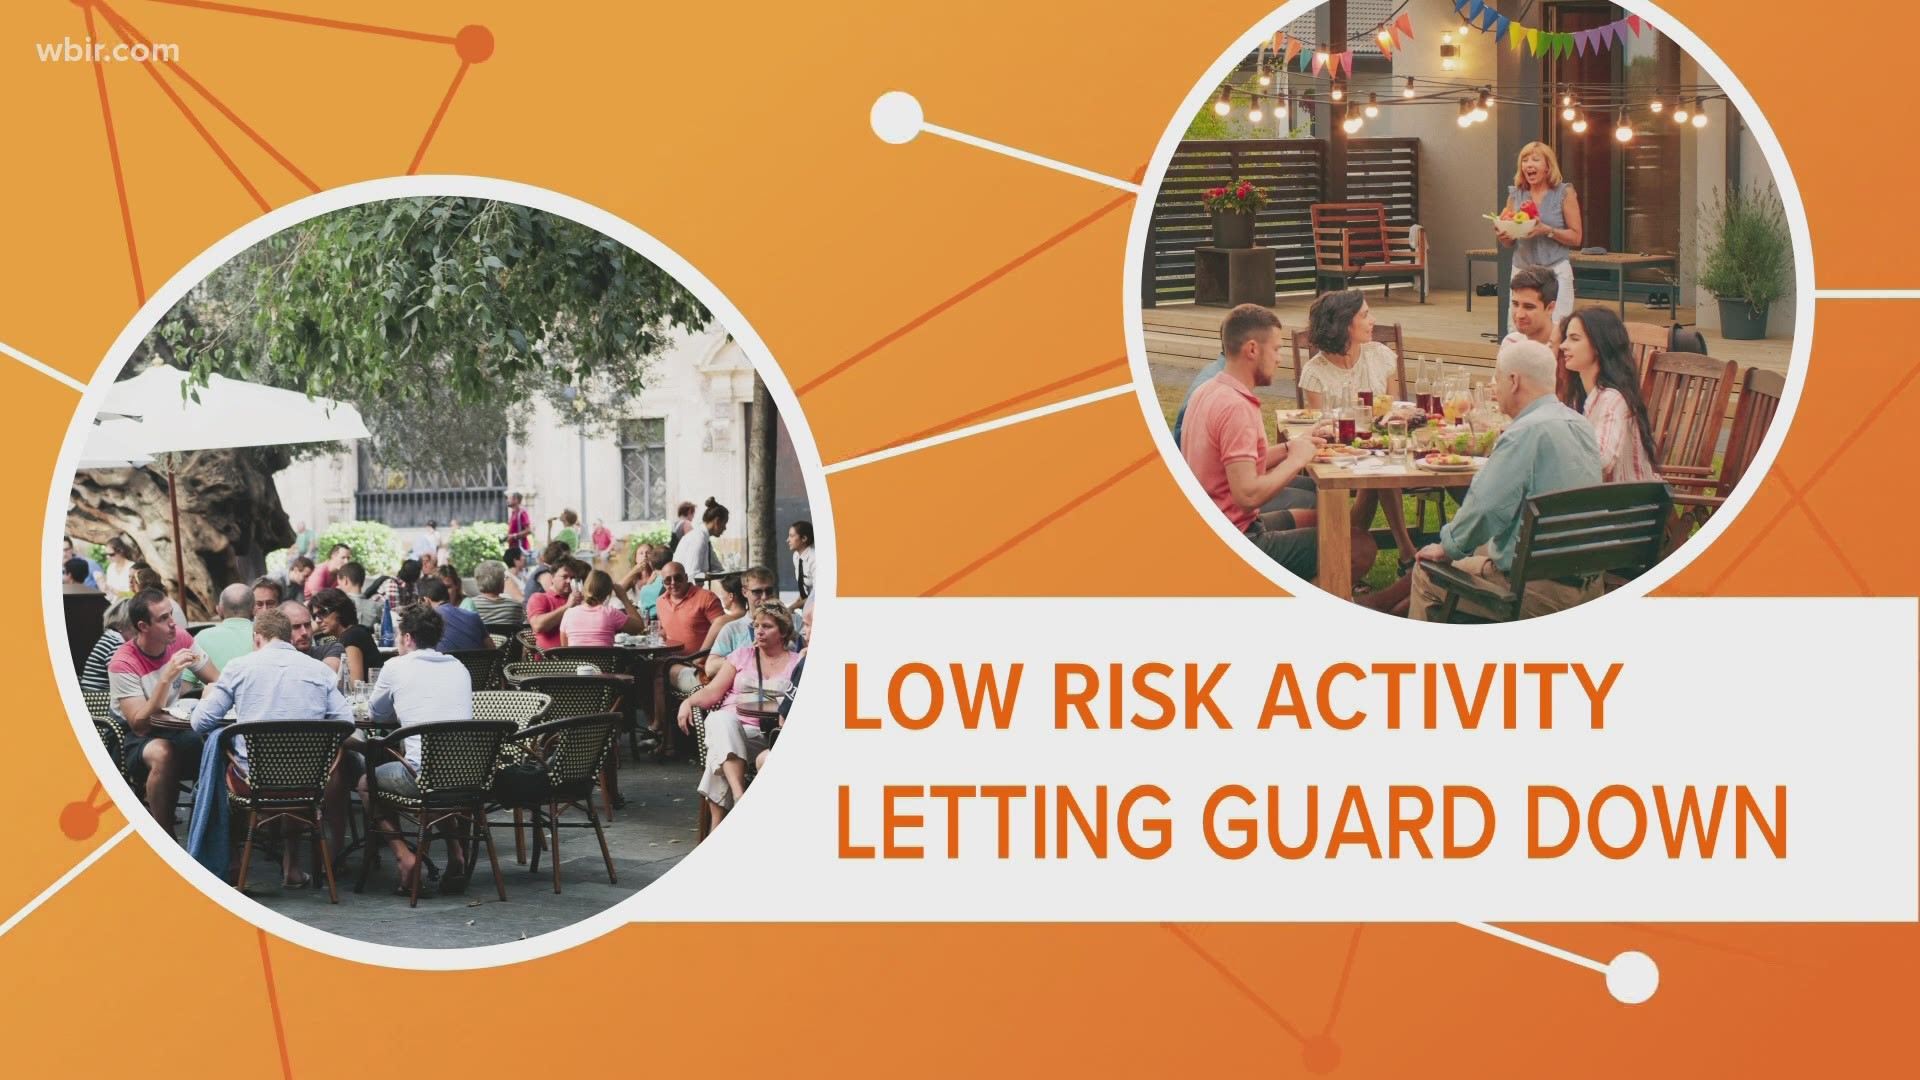 Sharing a meal outside with your friends is something a lot of us think as low risk for catching COVID-19 but experts say the virus is spreading because of one thing